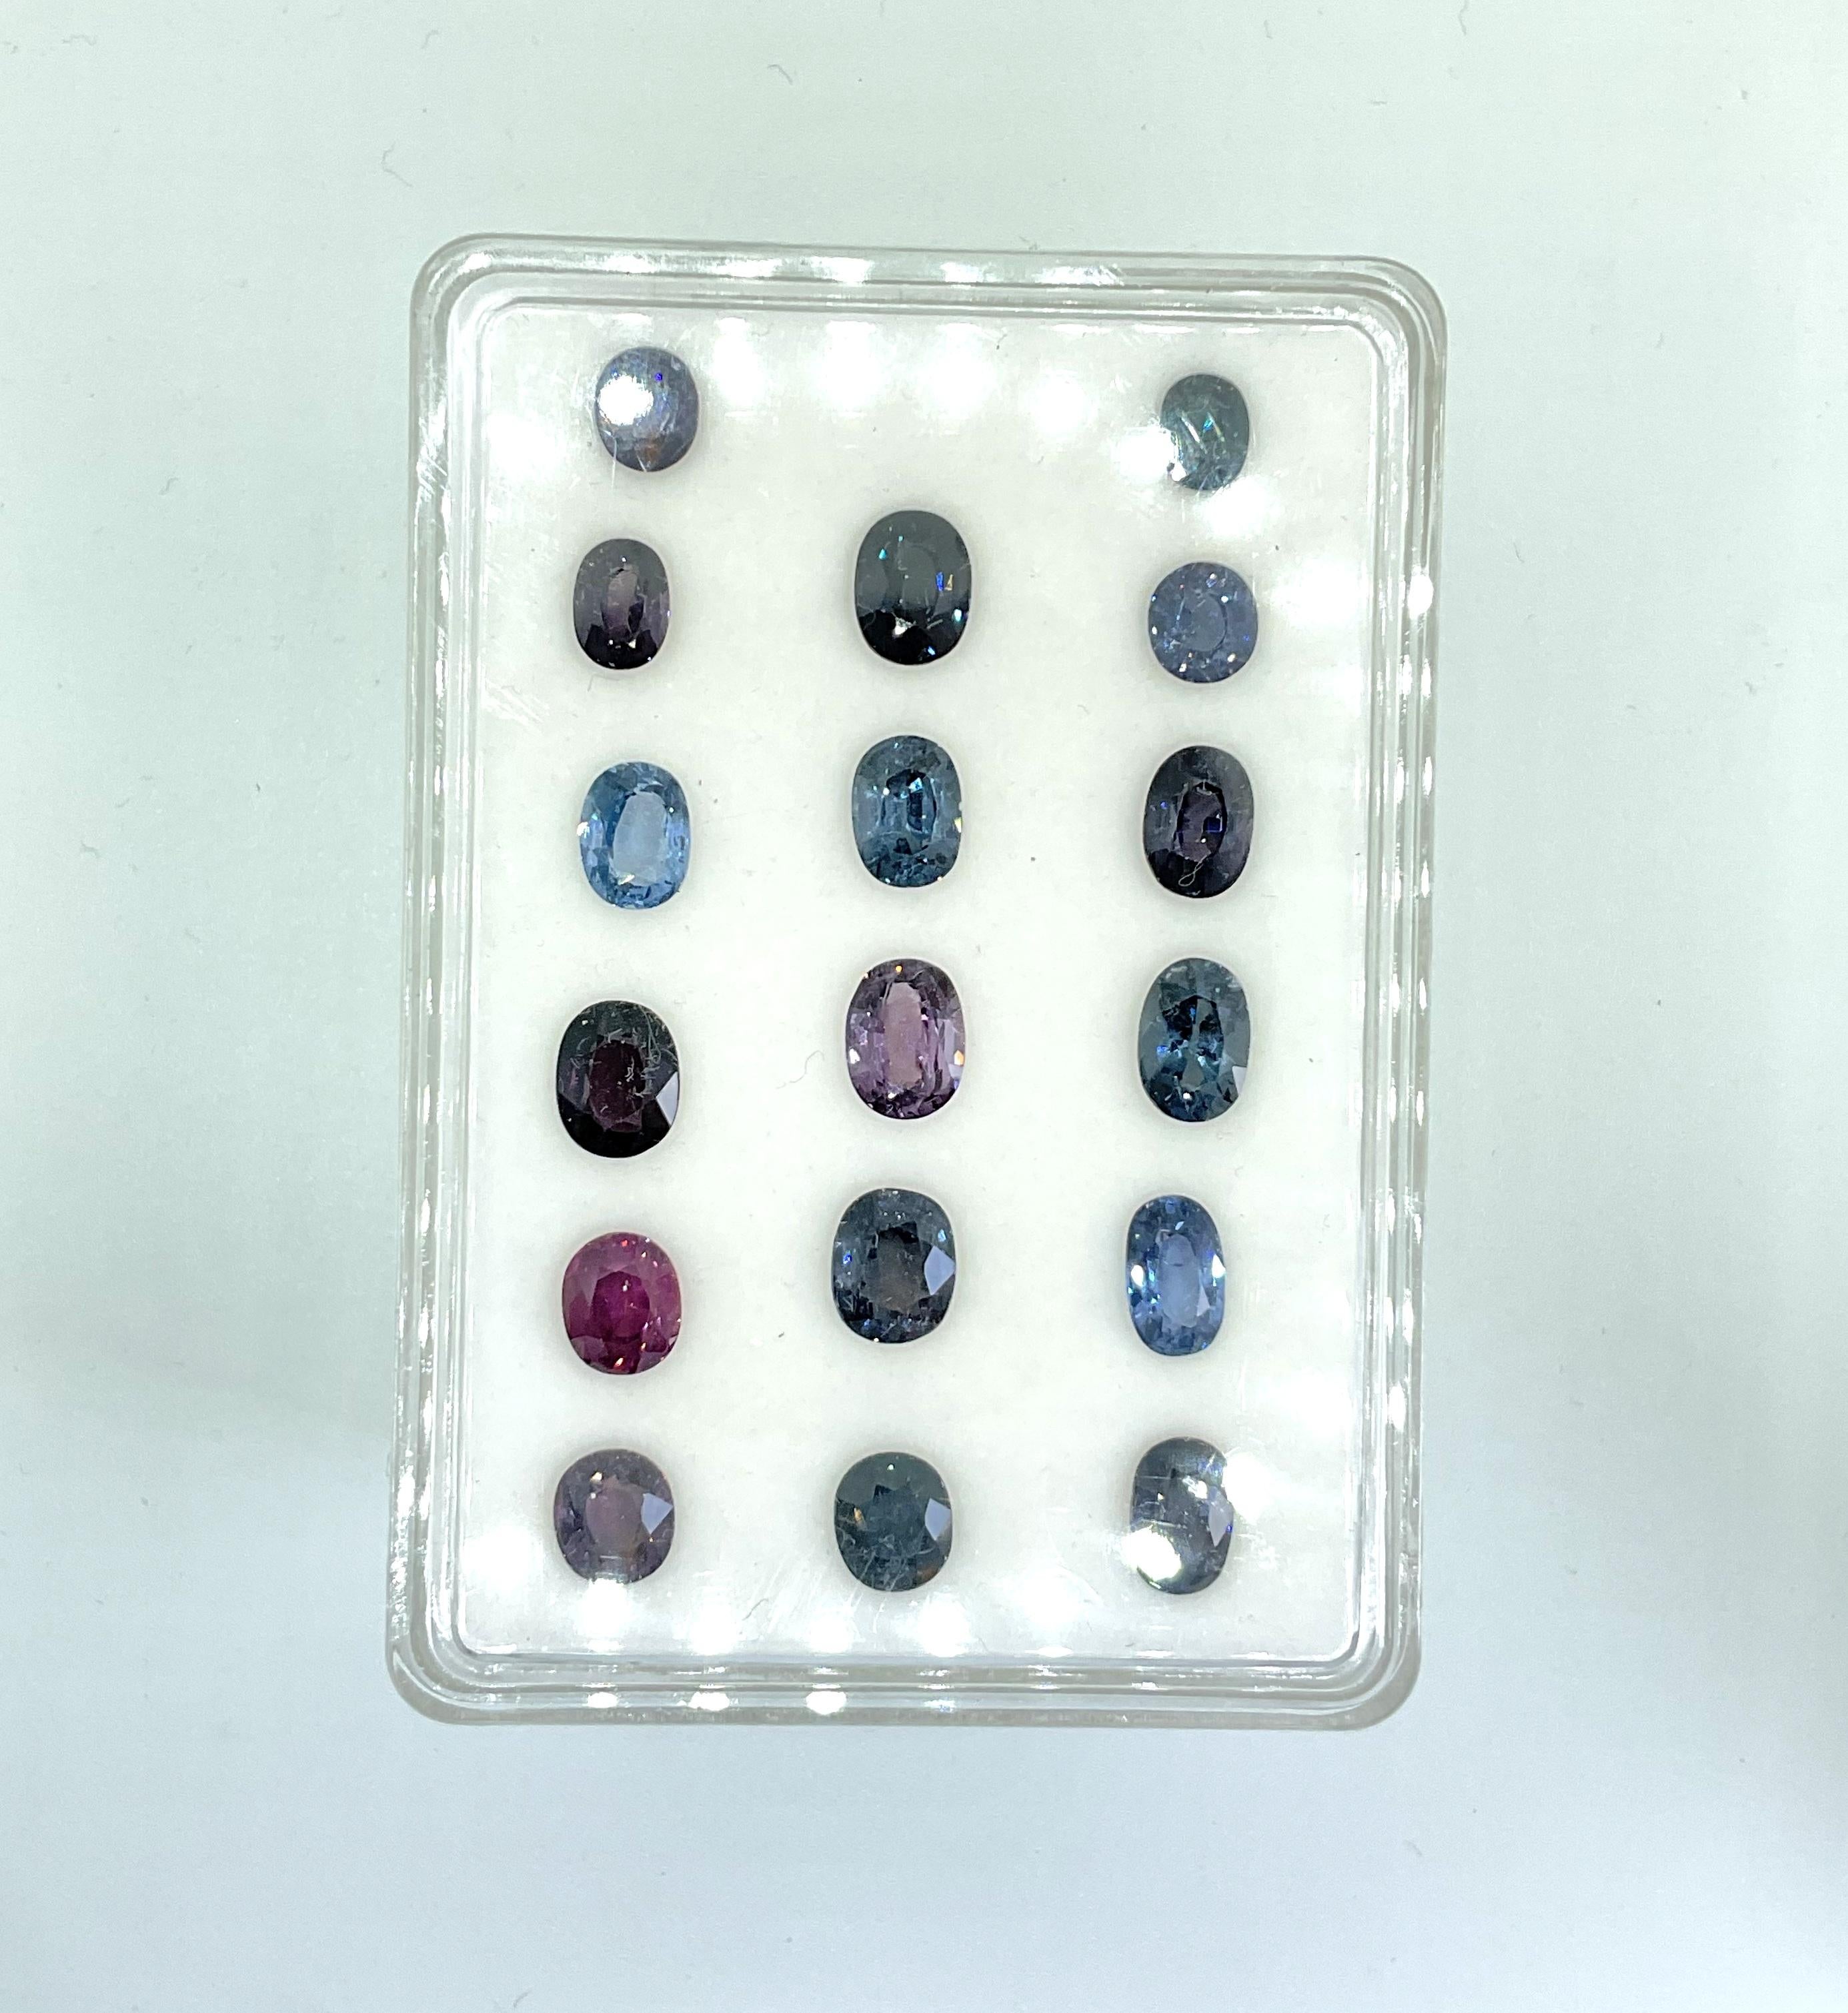 34.50 Carat Blue Spinel Tanzania Oval Faceted Natural Cut stone Fine Jewelry Gem

Weight - 34.50 Carats
Size - 7x6 To 9x7 mm
Shape - Oval
Quantity - 17 Pieces